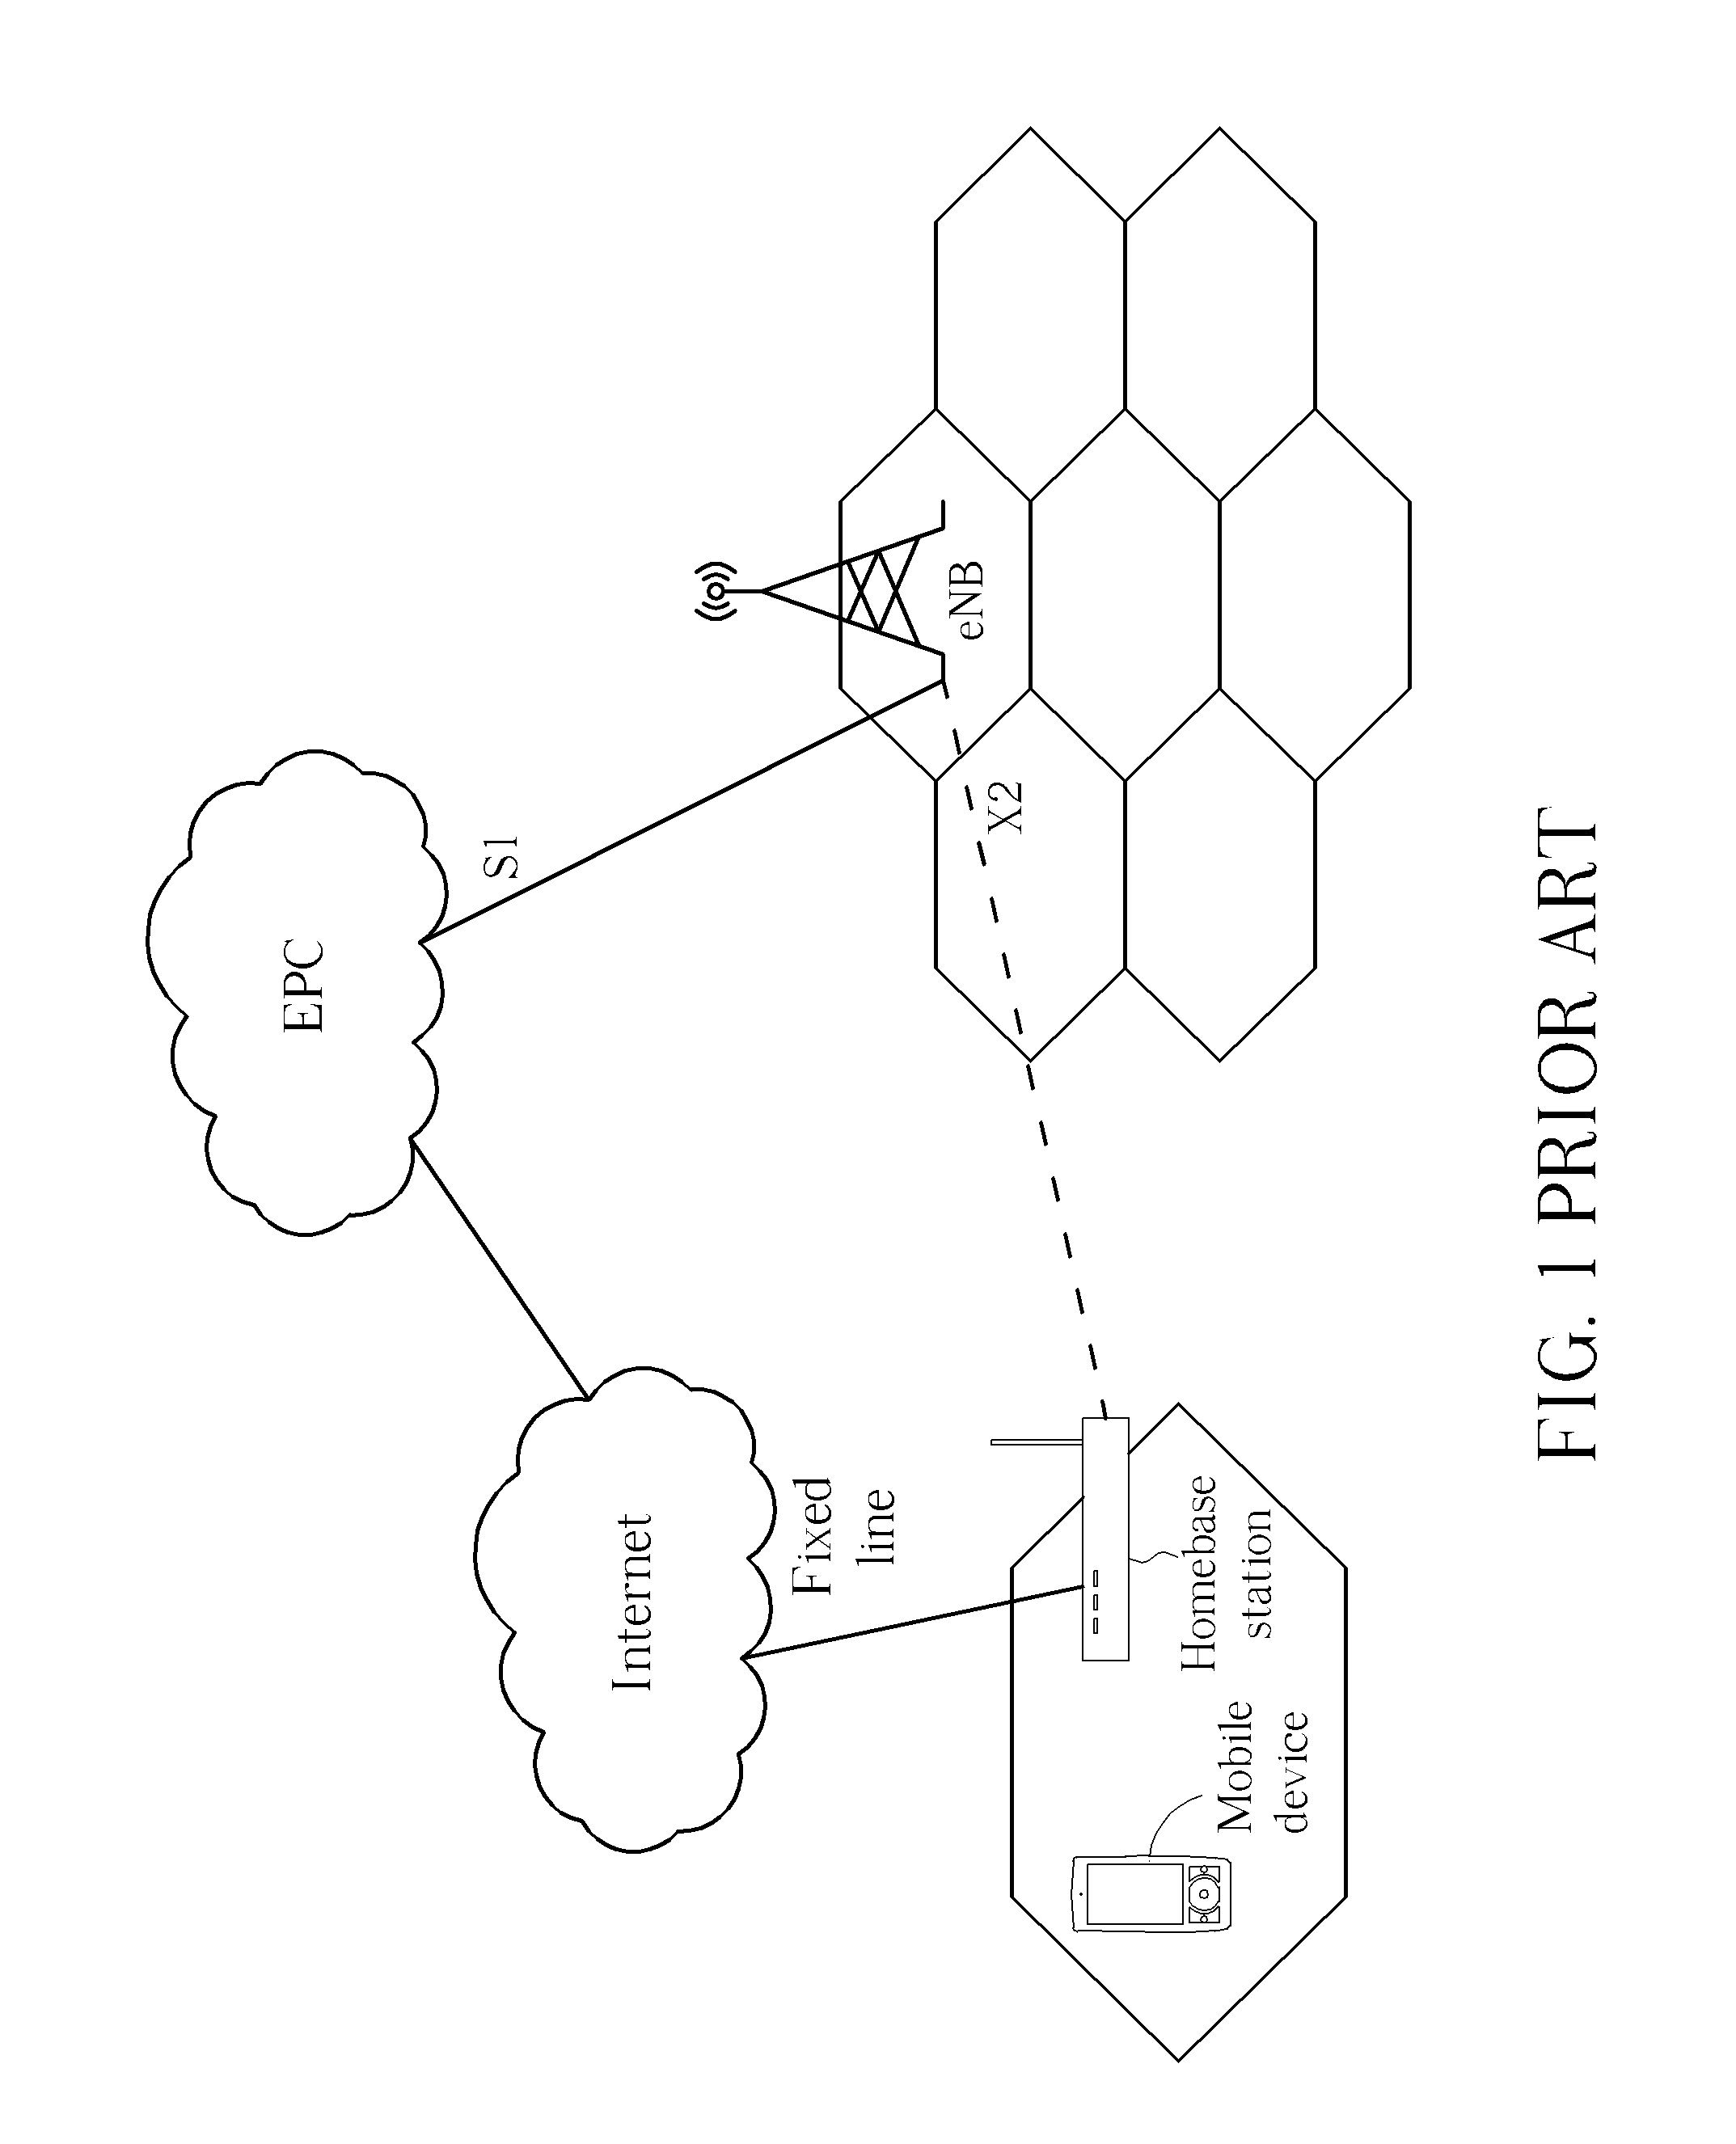 Method of Initiating Handover Pre-preparation and Related Communication Device